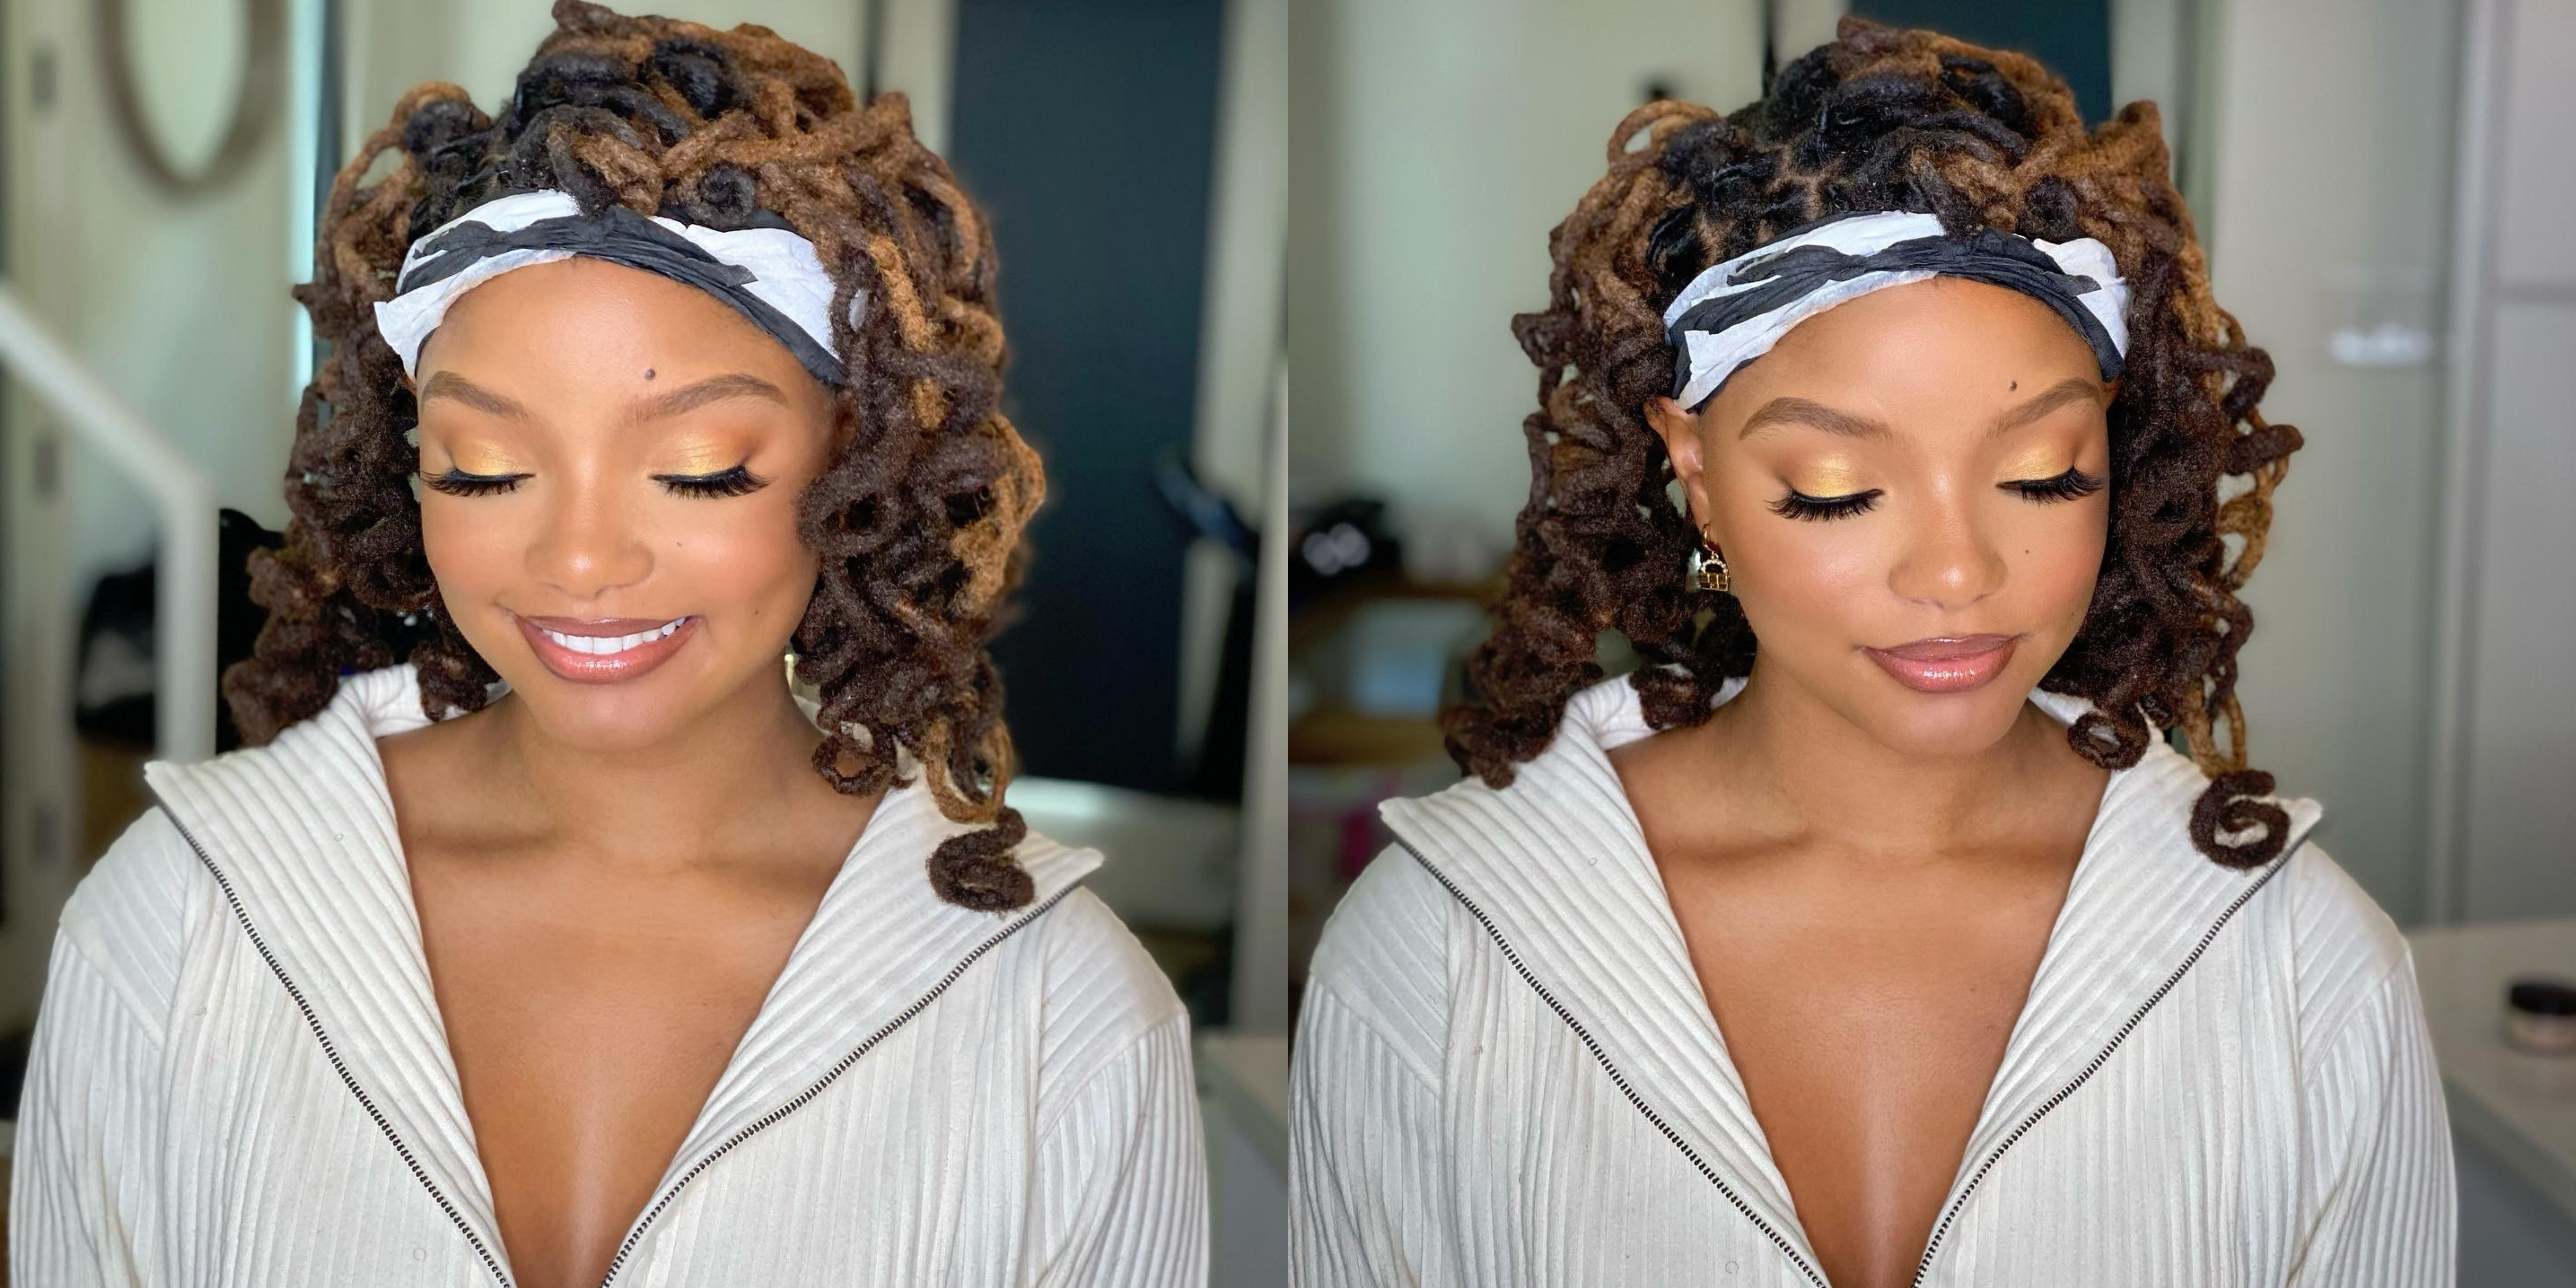 Halle Bailey Used This Instagram-Famous Makeup Brand On The Set Of ‘The Color Purple’